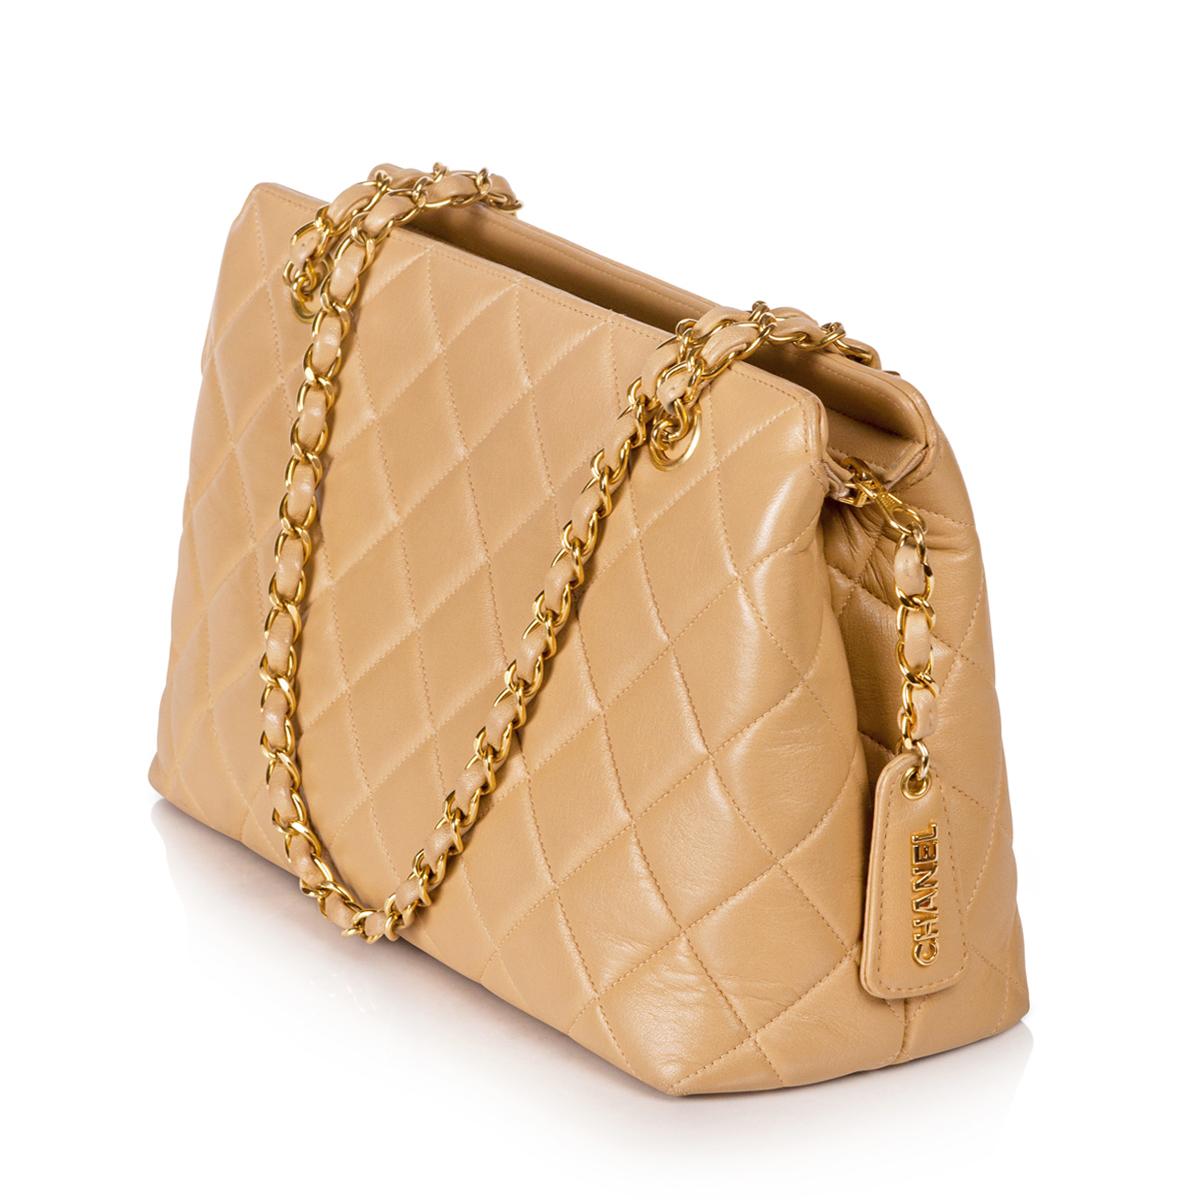 Chanel vintage beige quilted lambskin leather bag, made in France, 1997.

Date of manufacture: 1997
Origin: France
Material: lambskin leather, gold-tone hardware
Hardware: gold-tone
Includes: serial/n, dust bag
Dimensions: H 27 cm x W 19 cm x D 9